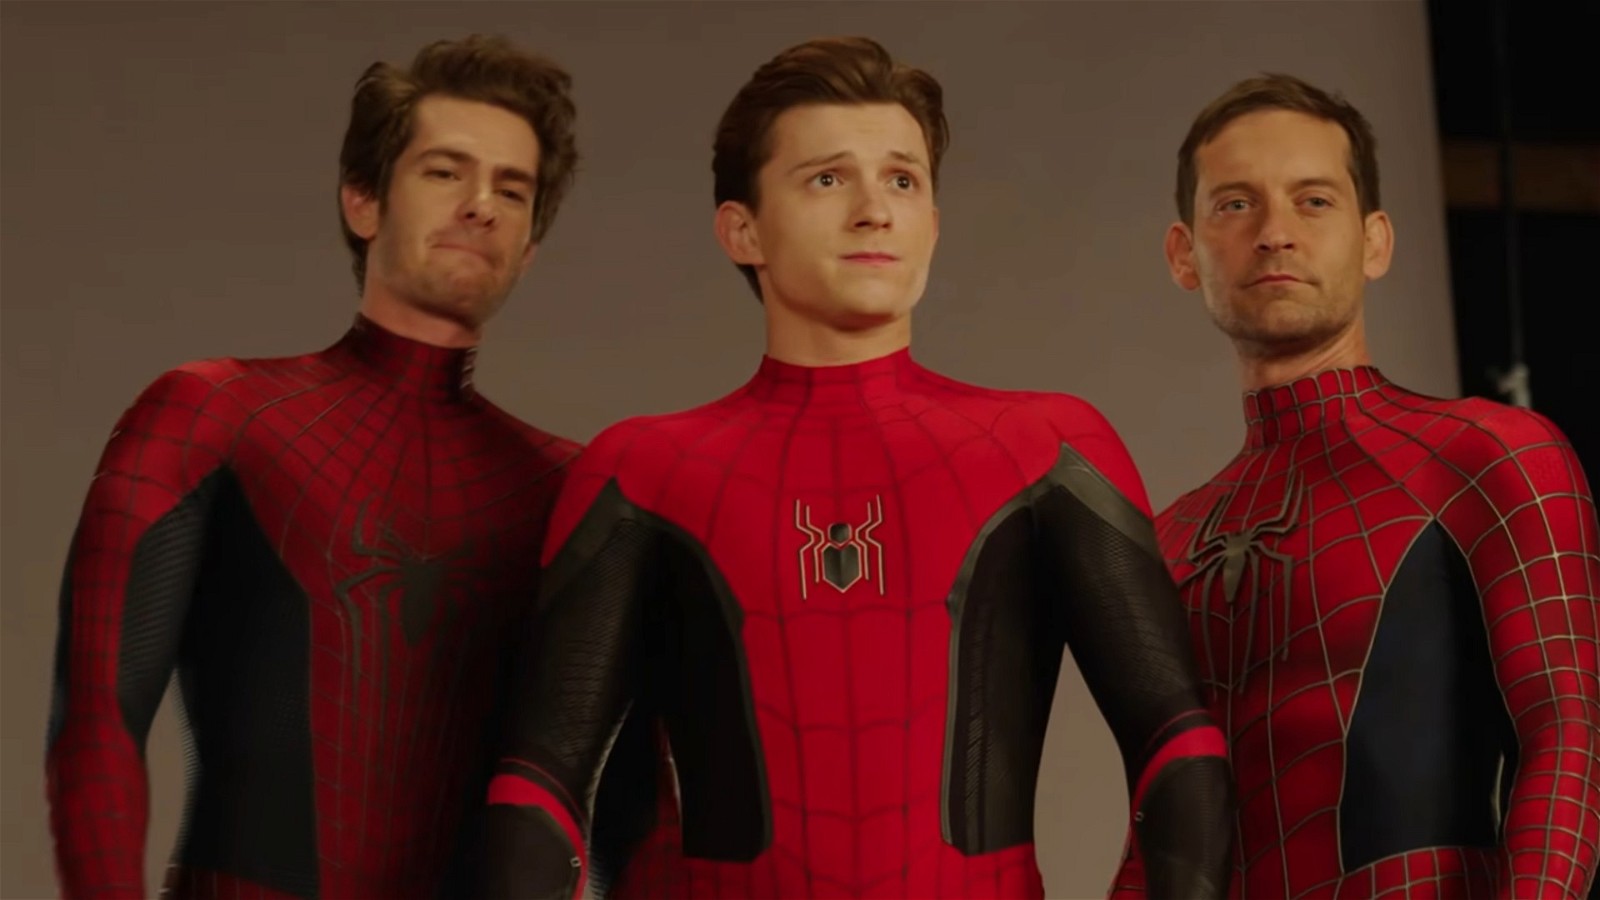 All the three iterations of Spider-Man in a single frame.